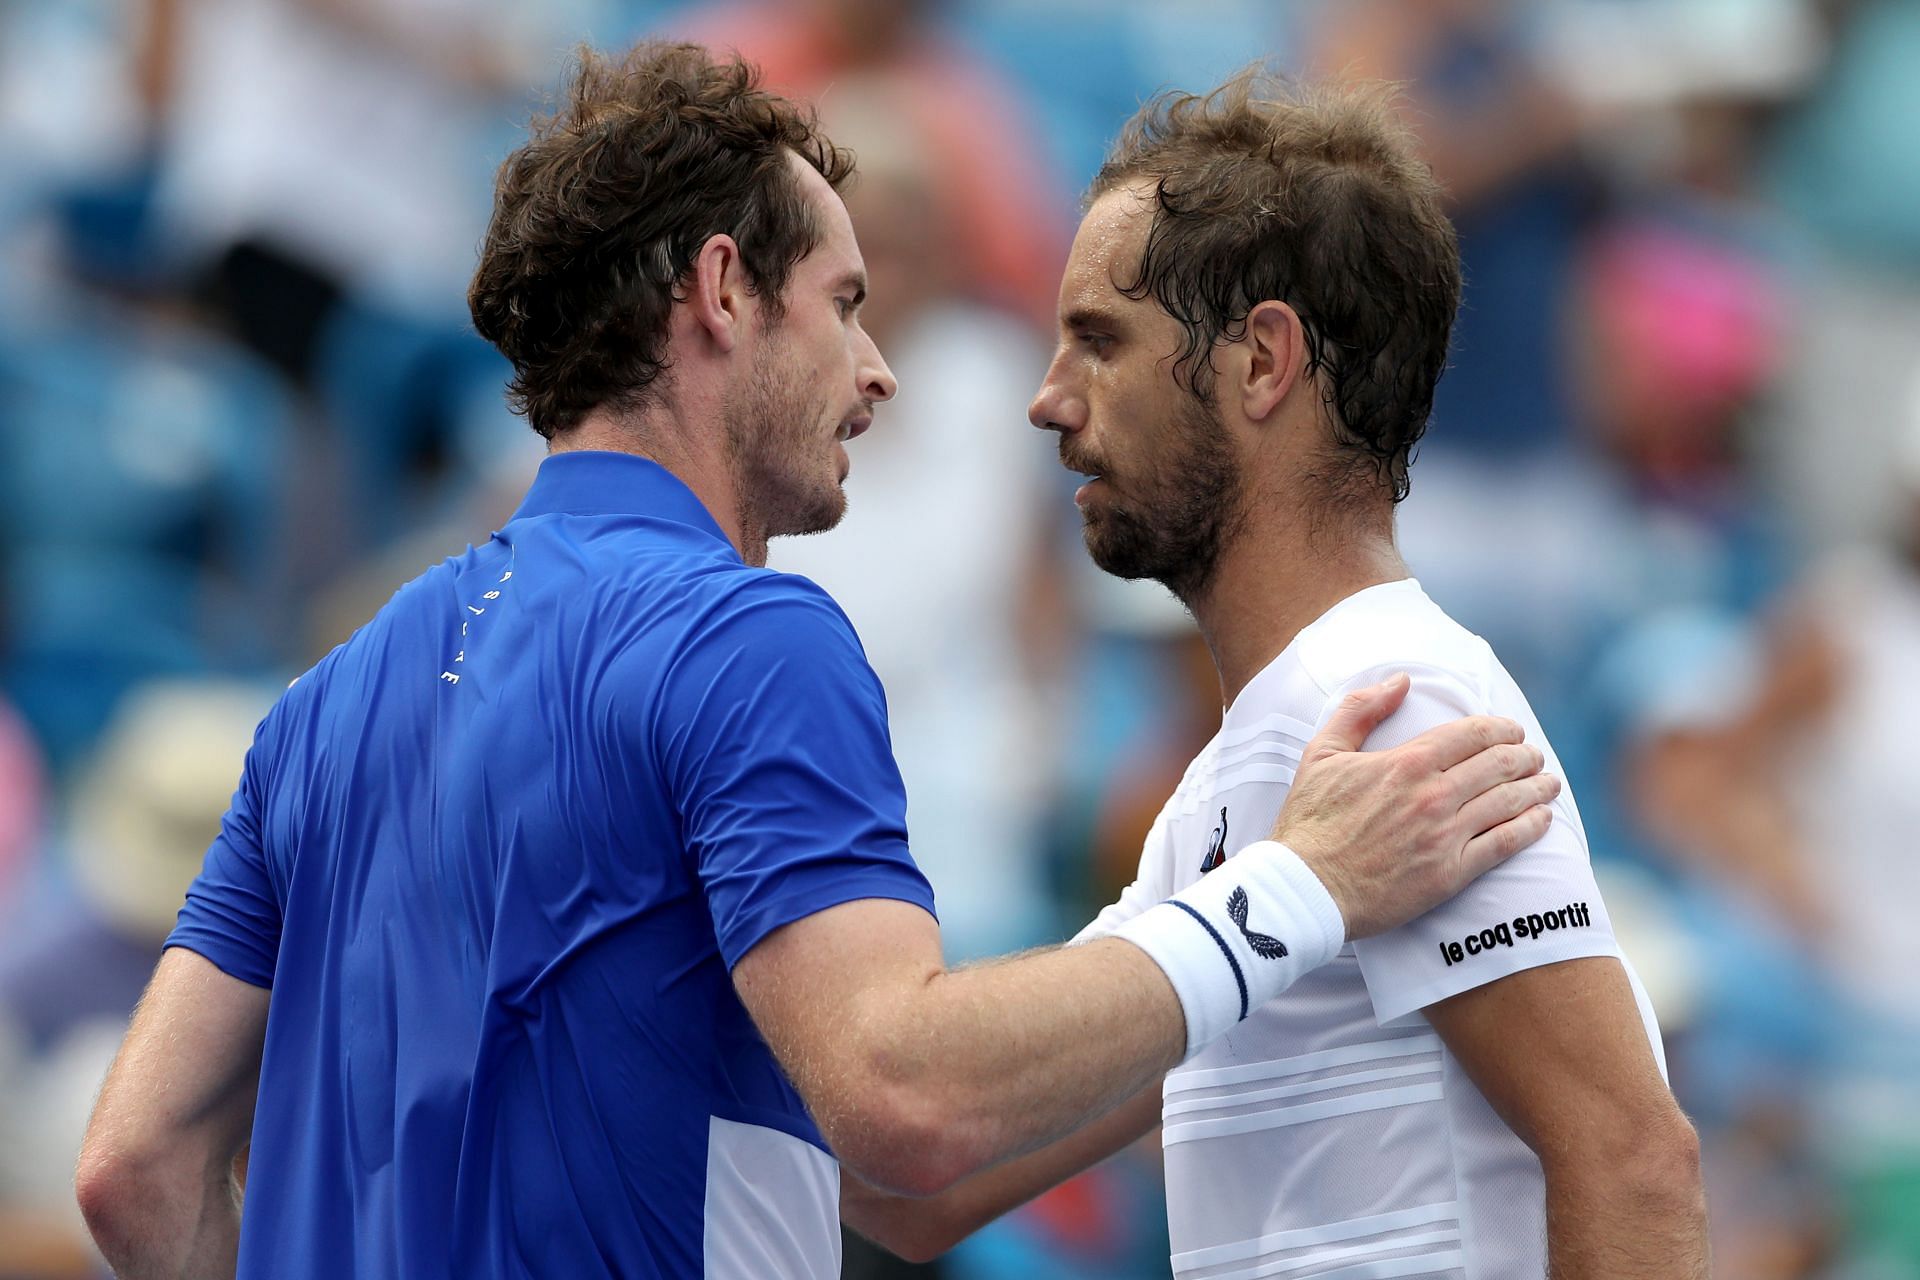 Richard Gasquet and Andy Murray